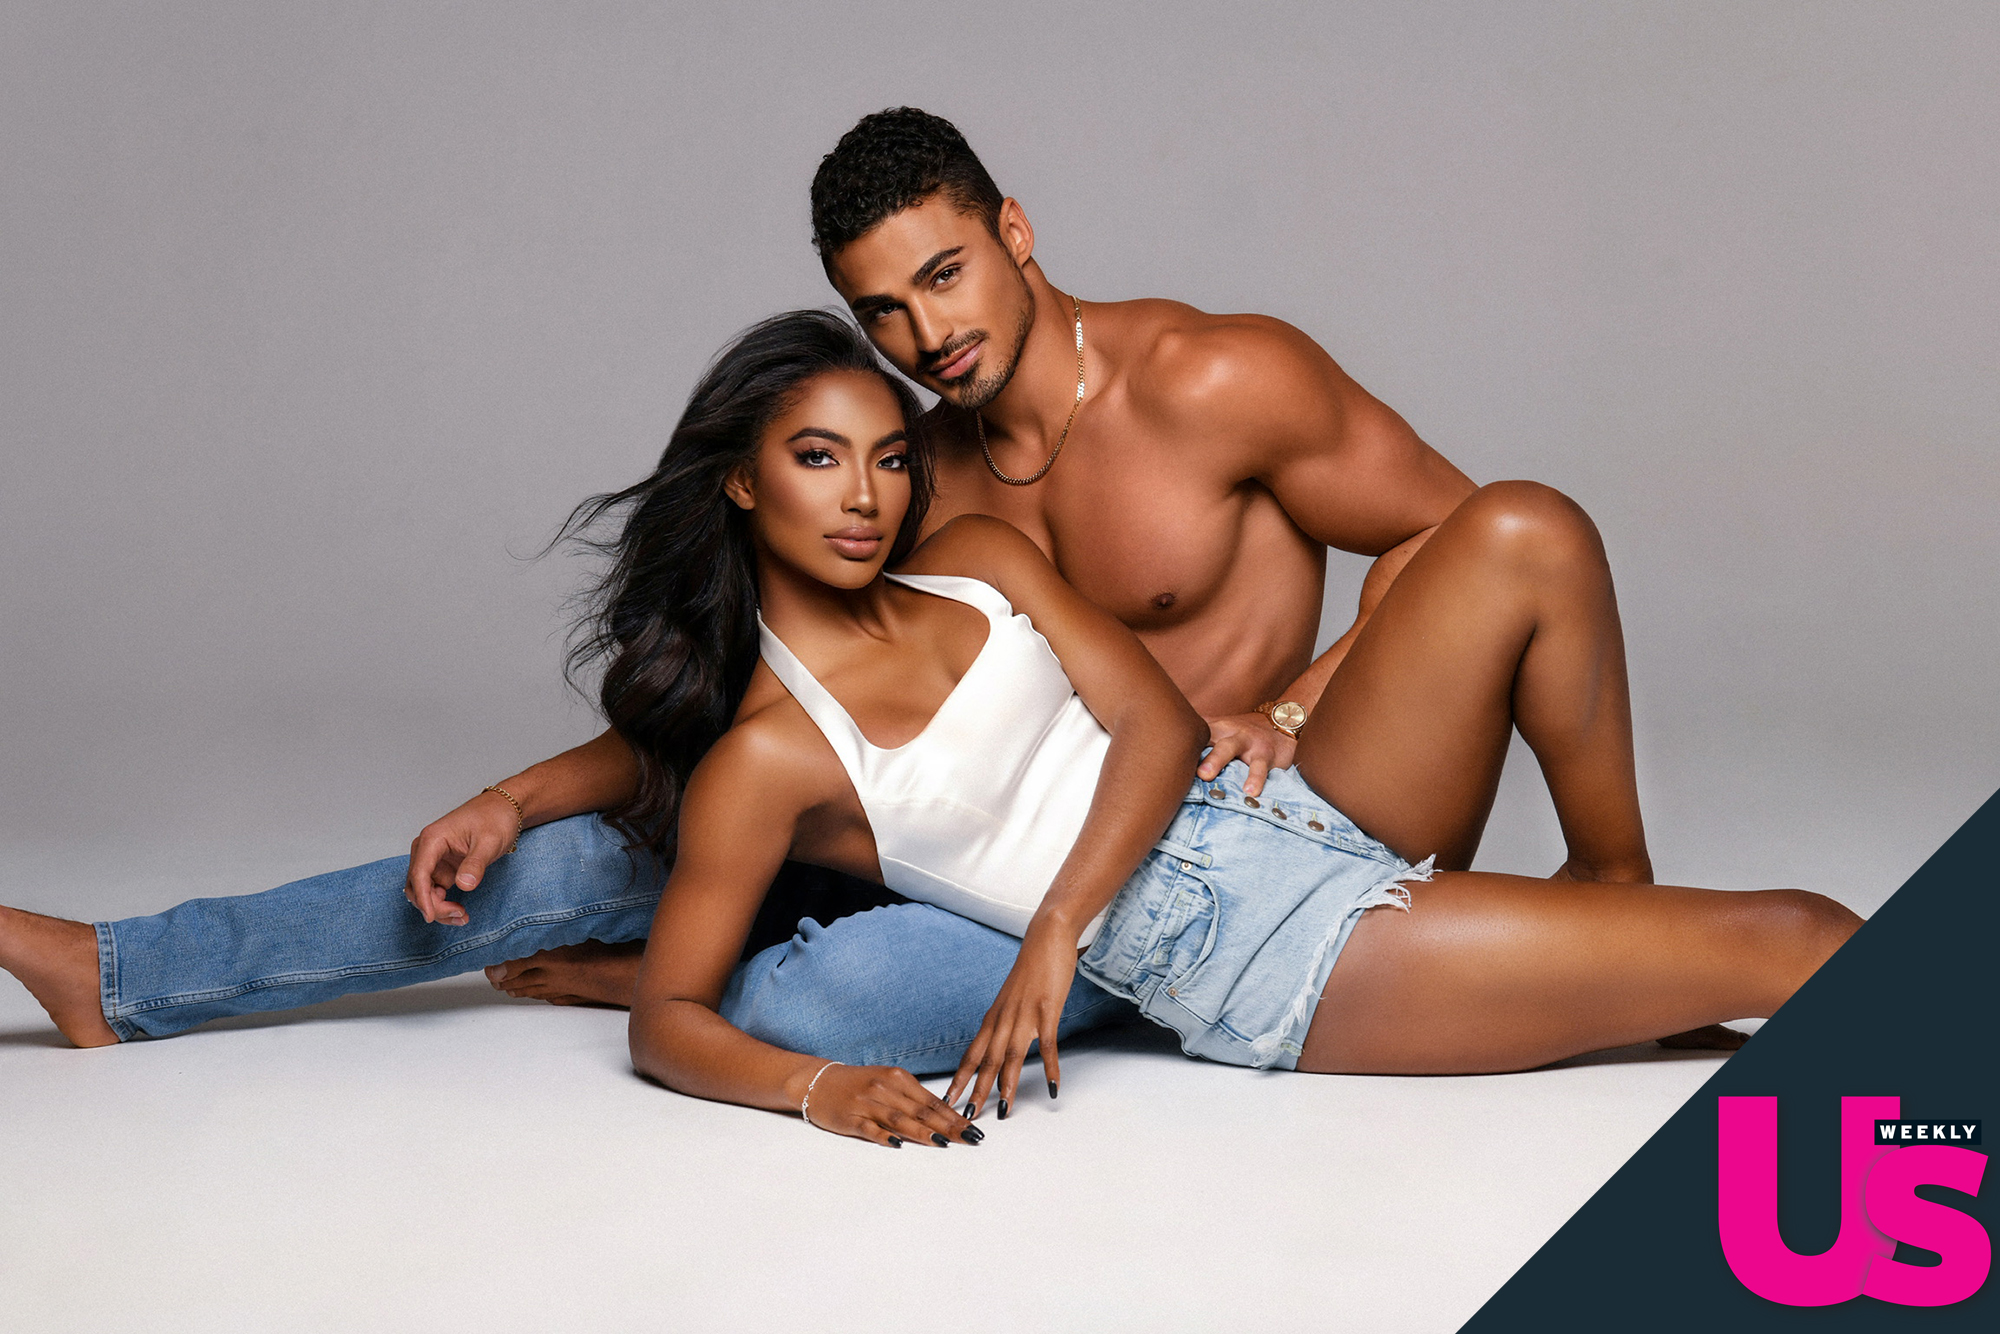 Big Brothers Taylor and Joseph Pose for Sexy Anniversary Photos photo pic